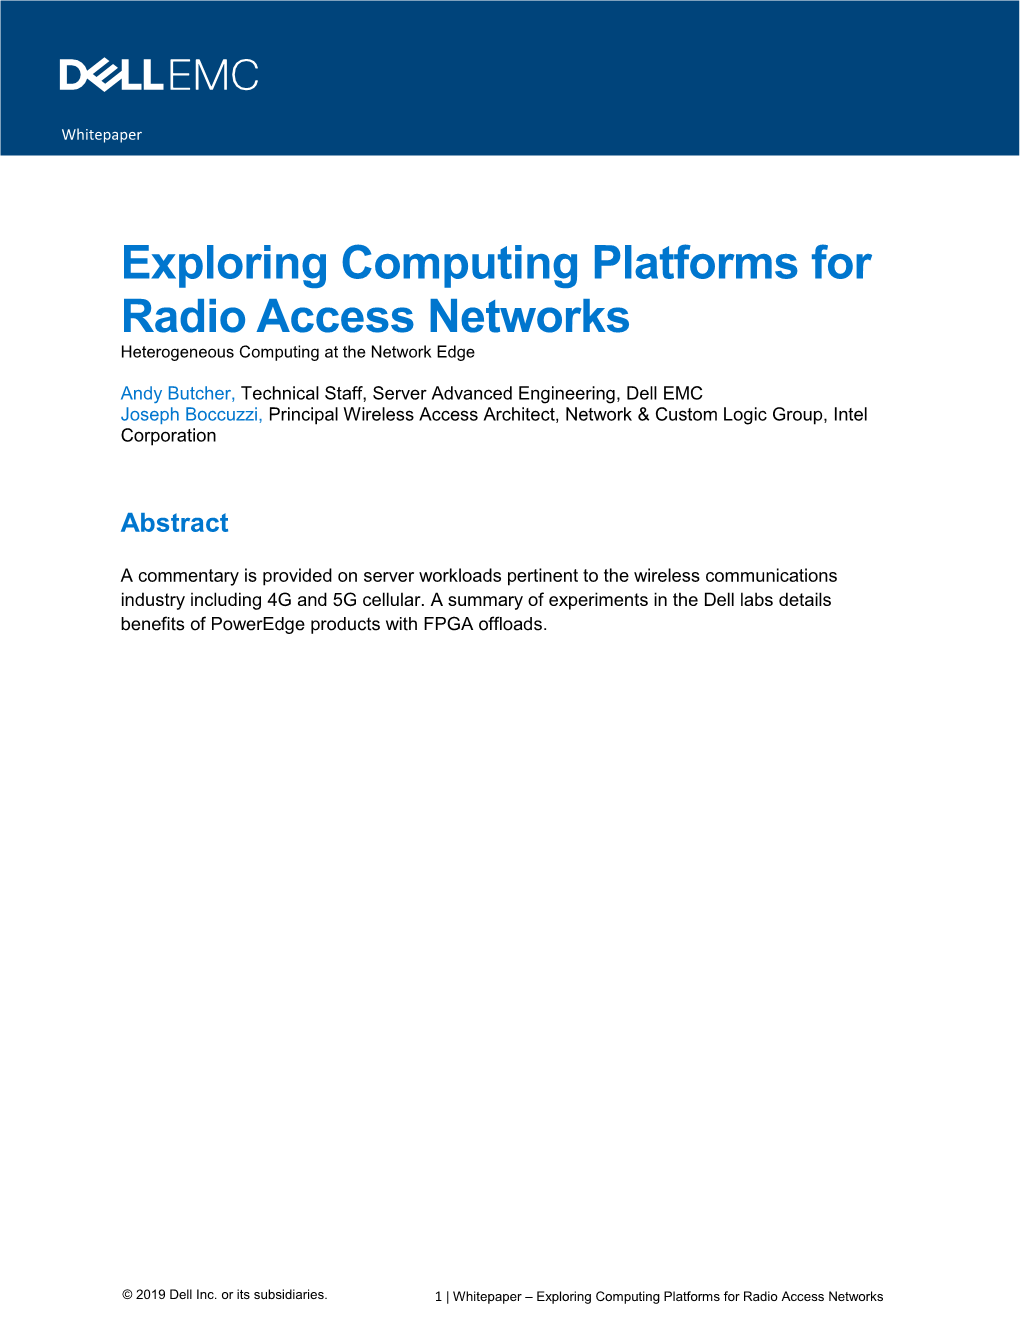 Exploring Computer Platforms for Radio Access Networks